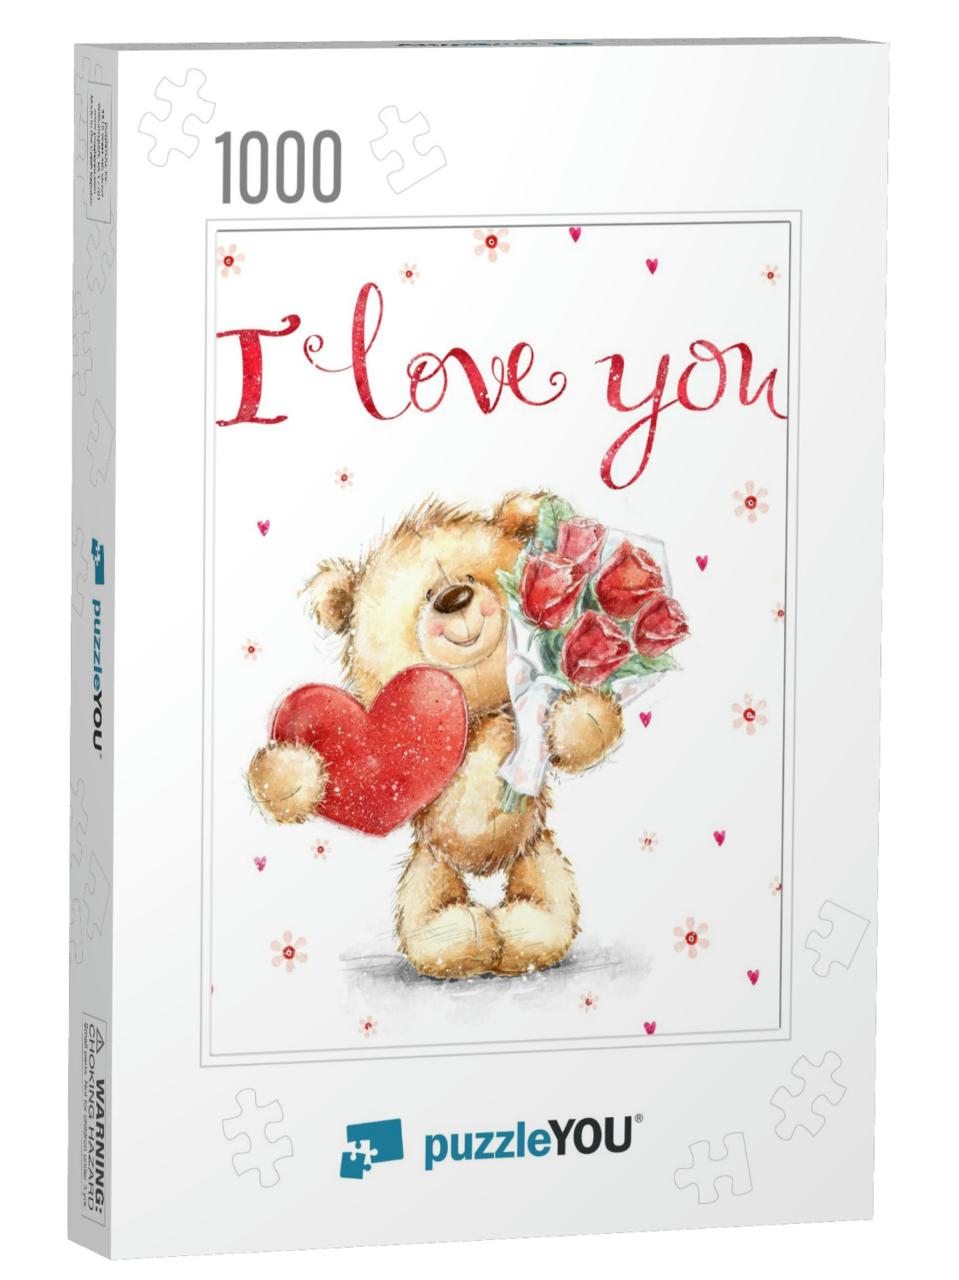 Cute Smiling Teddy Bear in Love on the Hearts Background... Jigsaw Puzzle with 1000 pieces